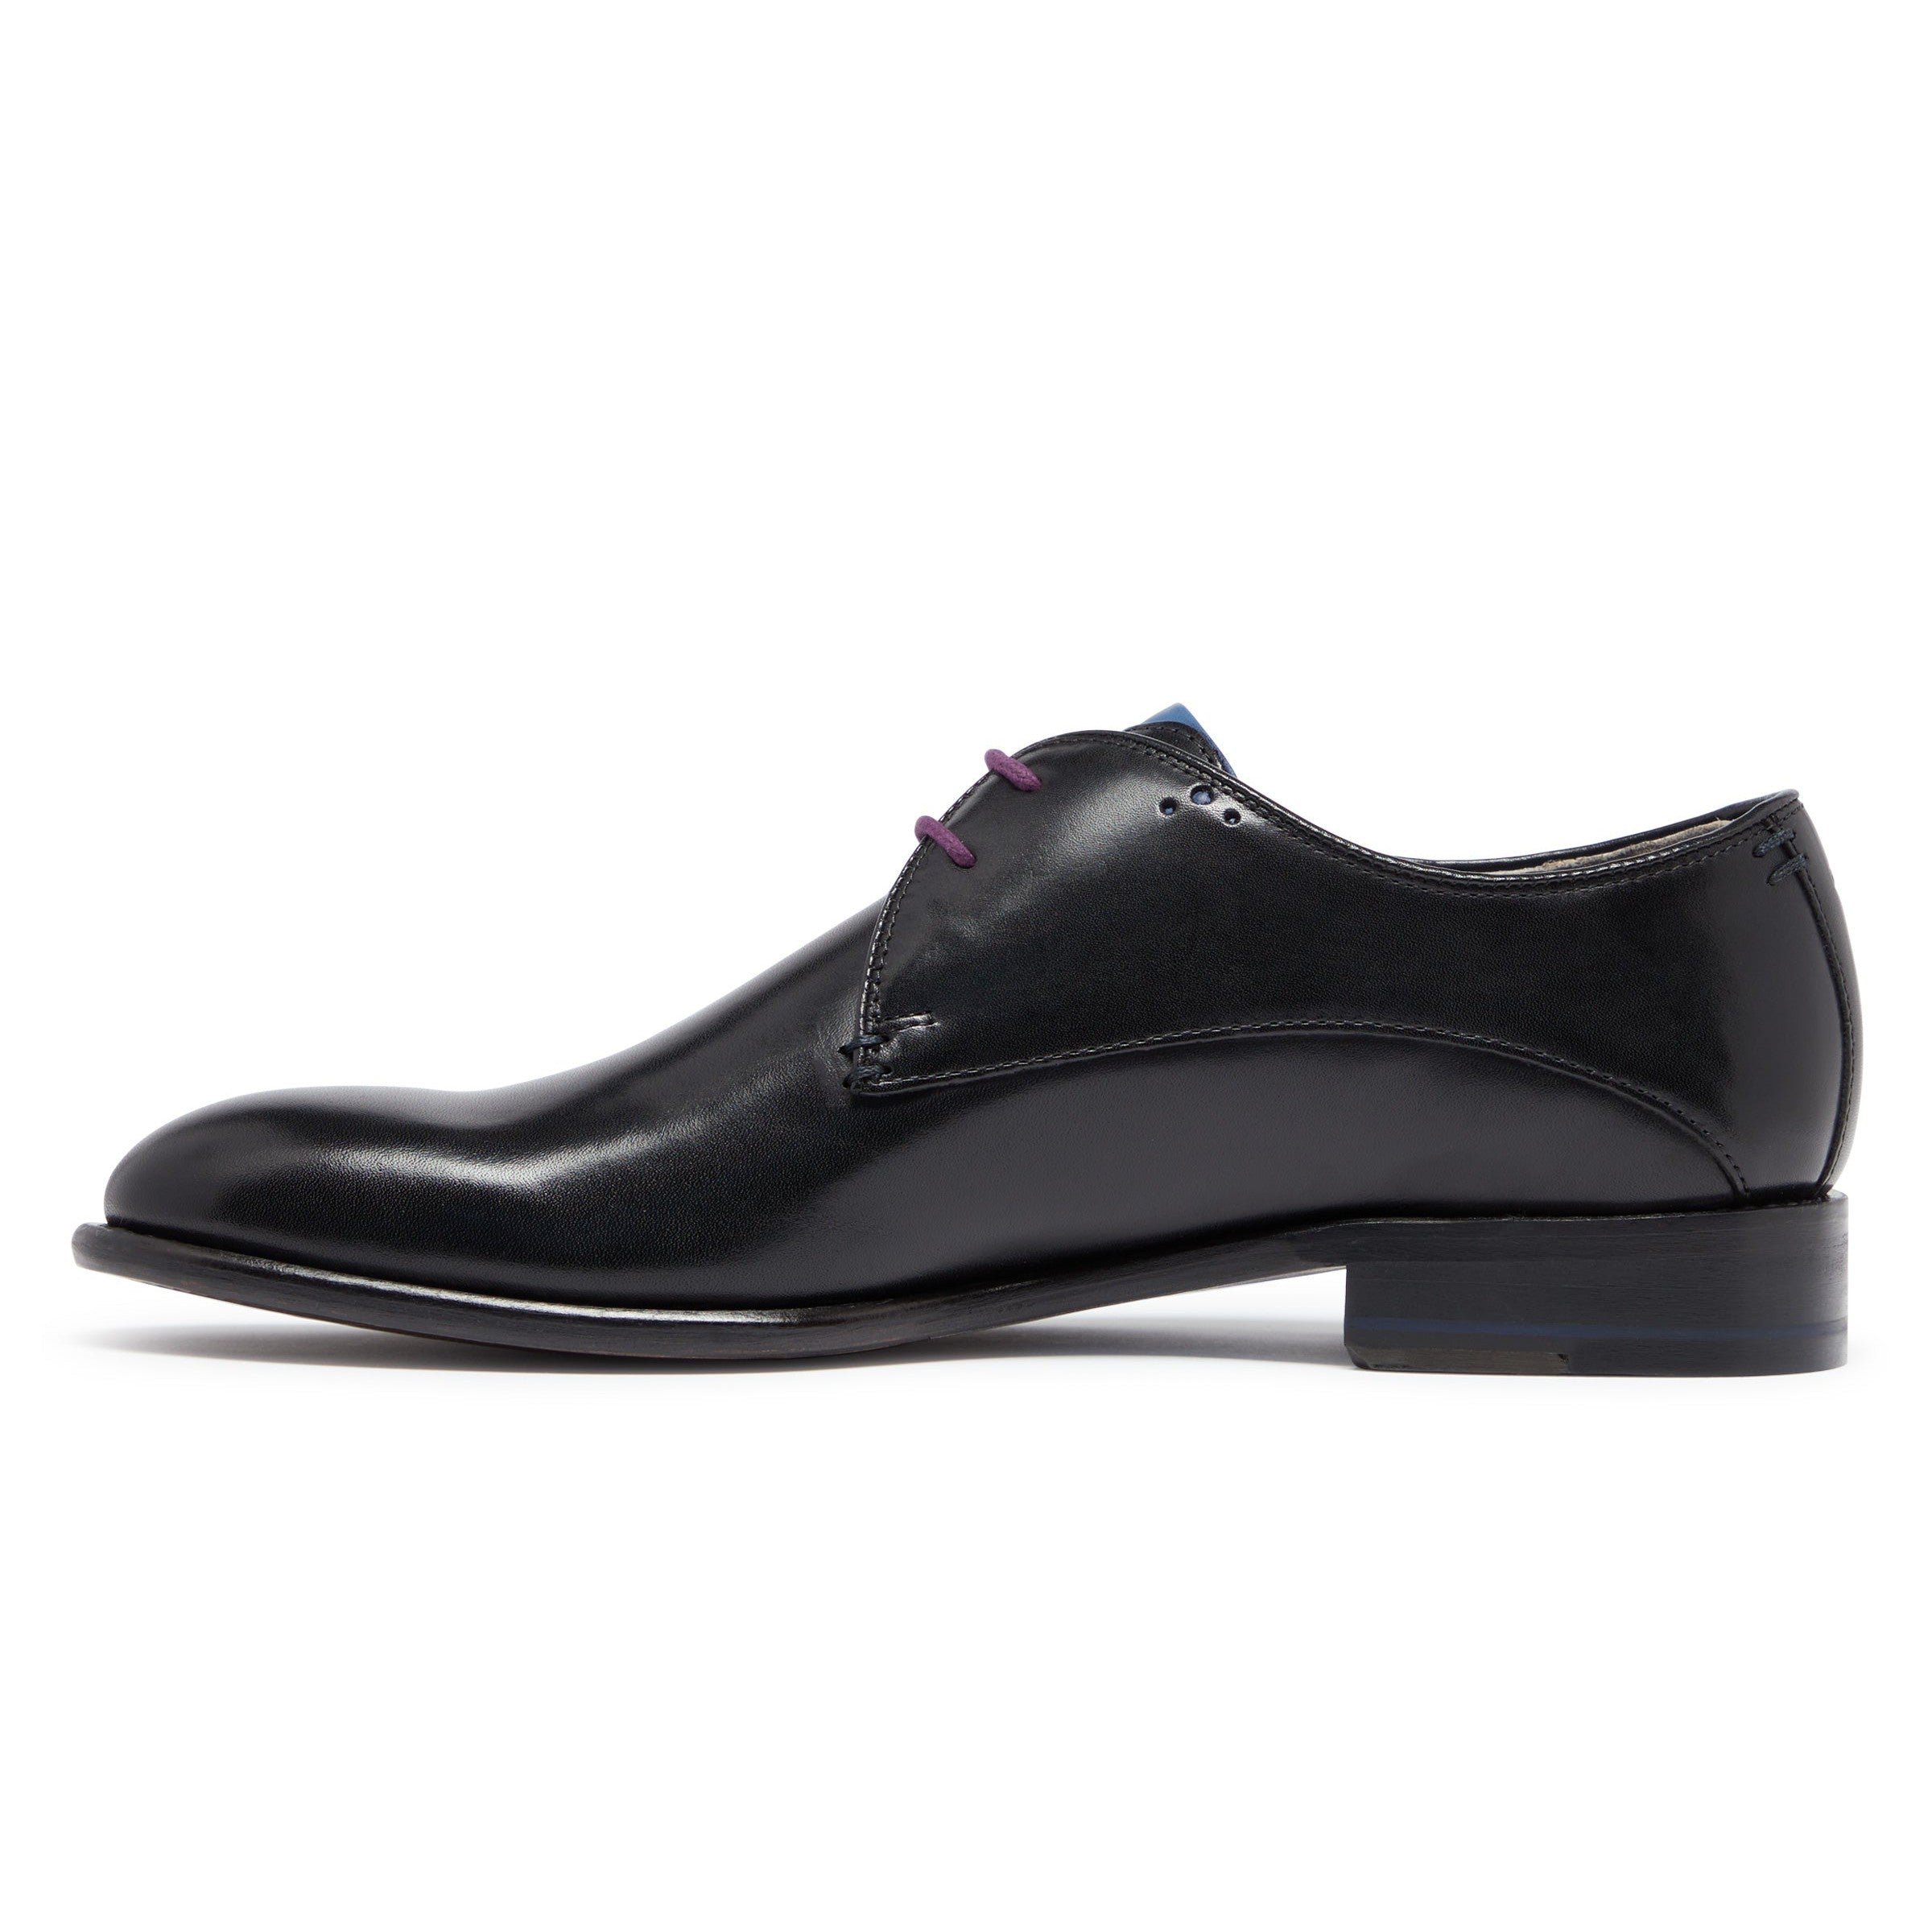 Oliver Sweeney Knole Calf Leather Shoes - Black - Size 10